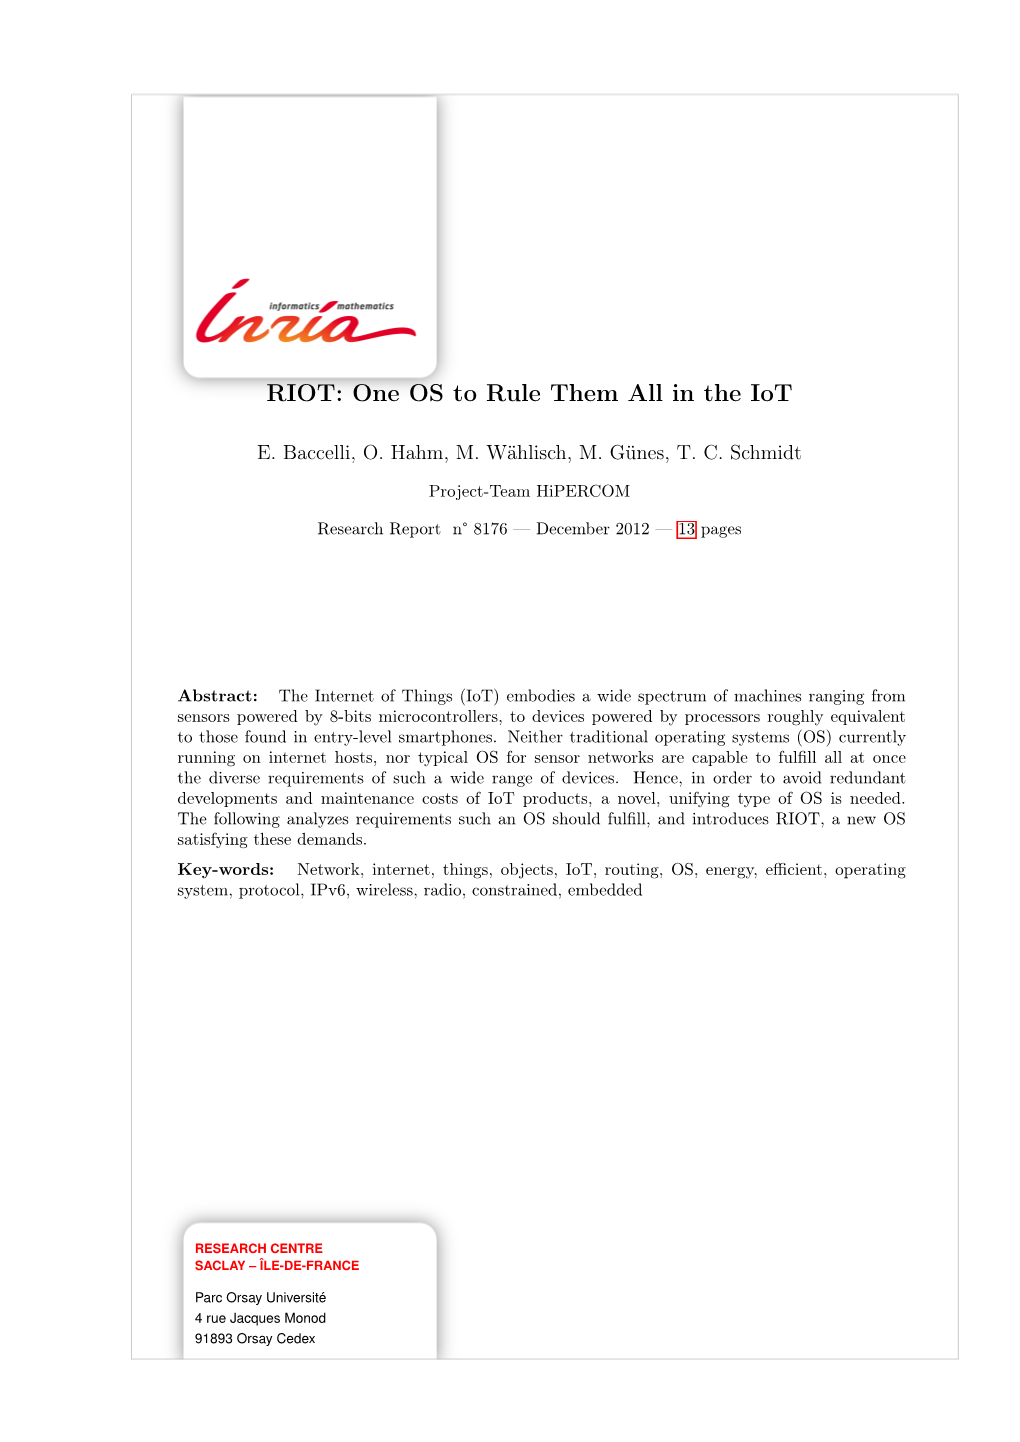 RIOT: One OS to Rule Them All in the Iot